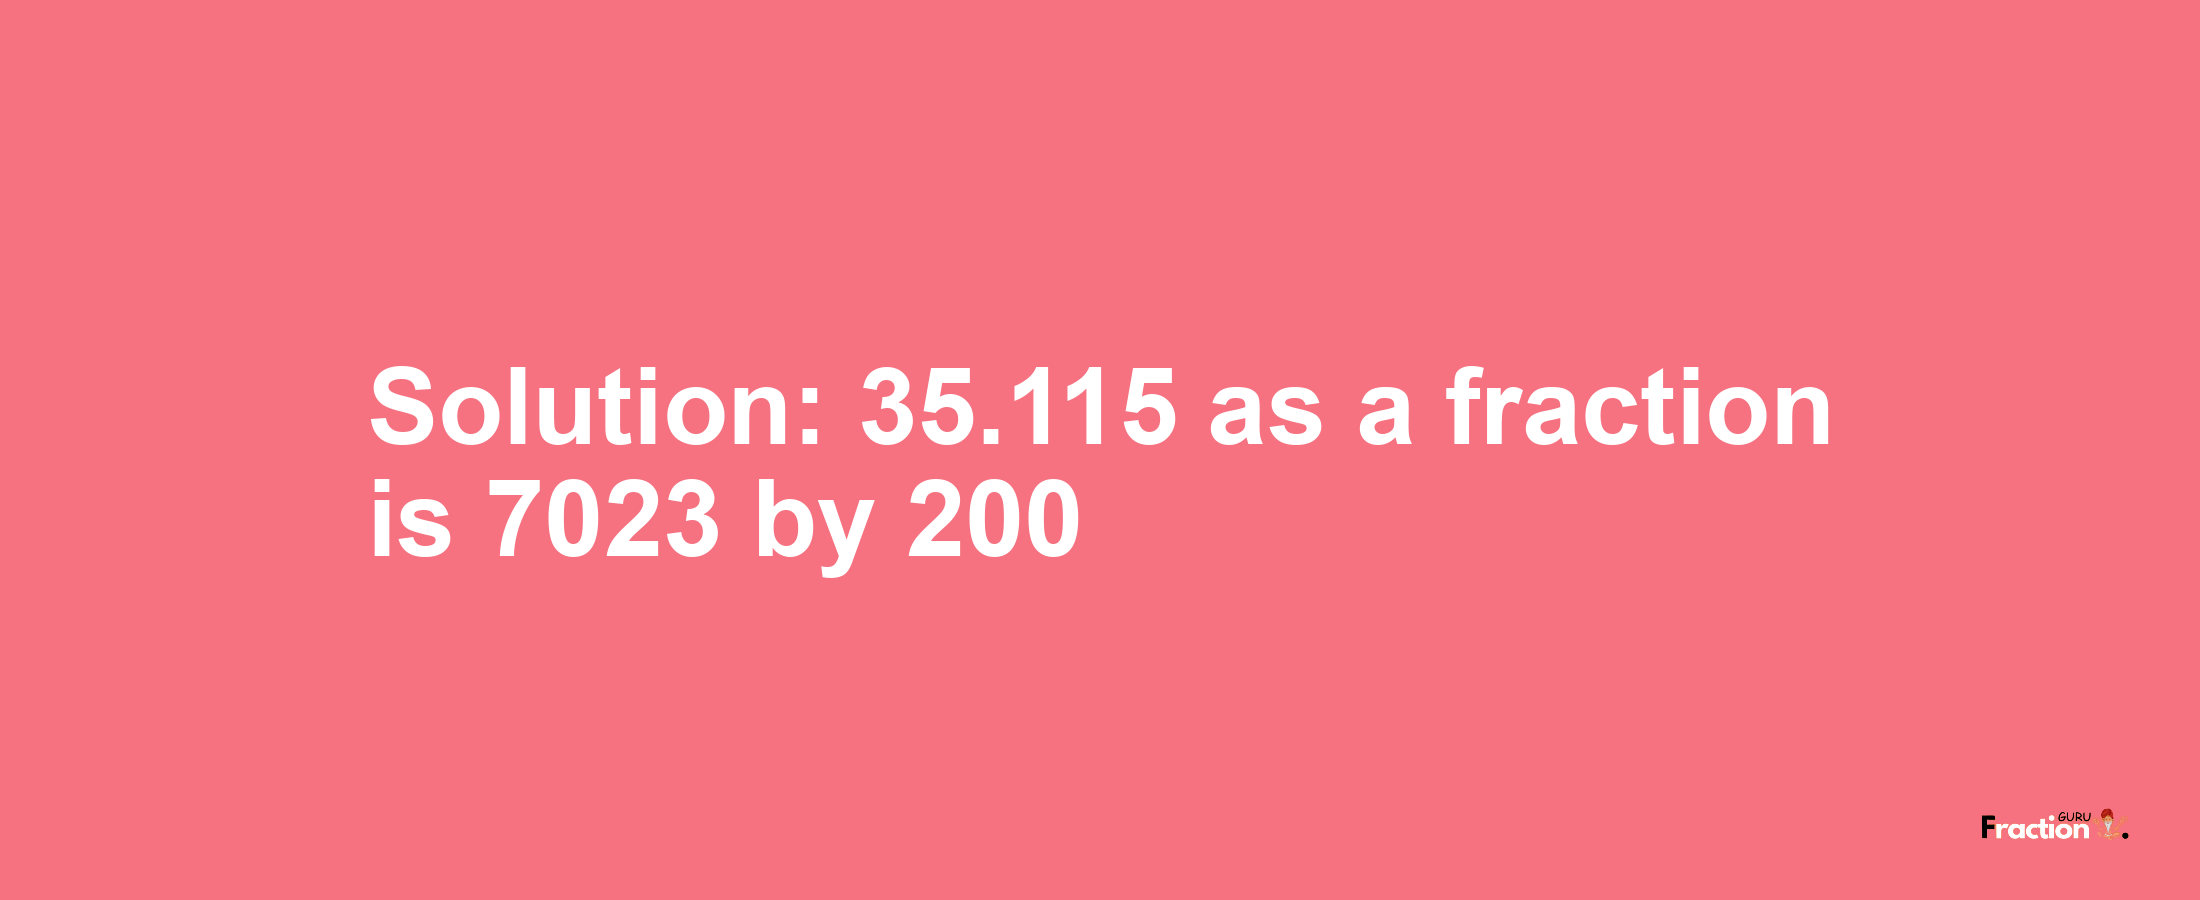 Solution:35.115 as a fraction is 7023/200